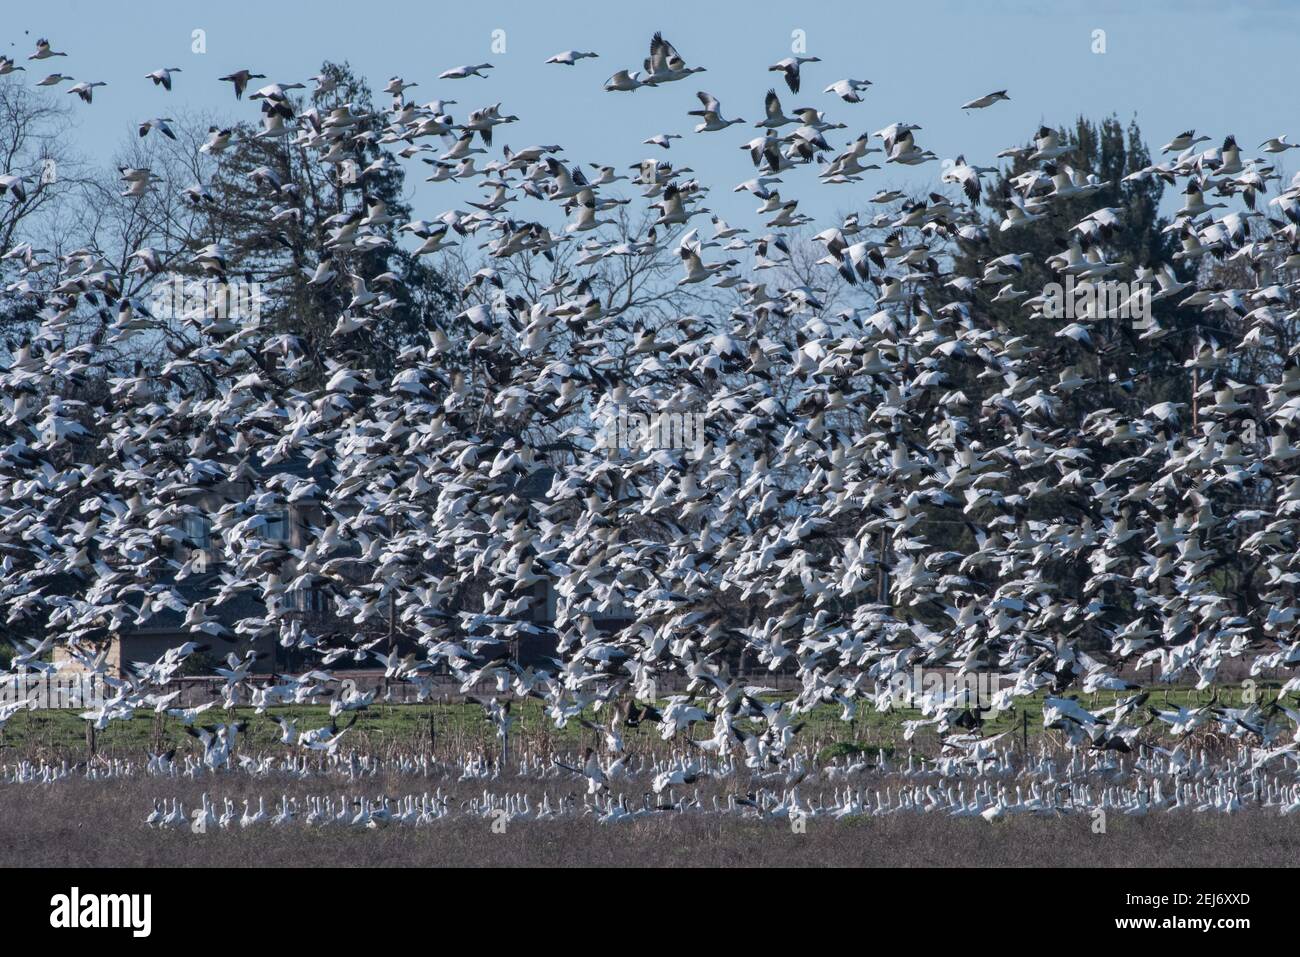 A huge group of flocking snow geese (Anser caerulescens) taking off and flying in Cosumnes river preserve in Northern California. Stock Photo